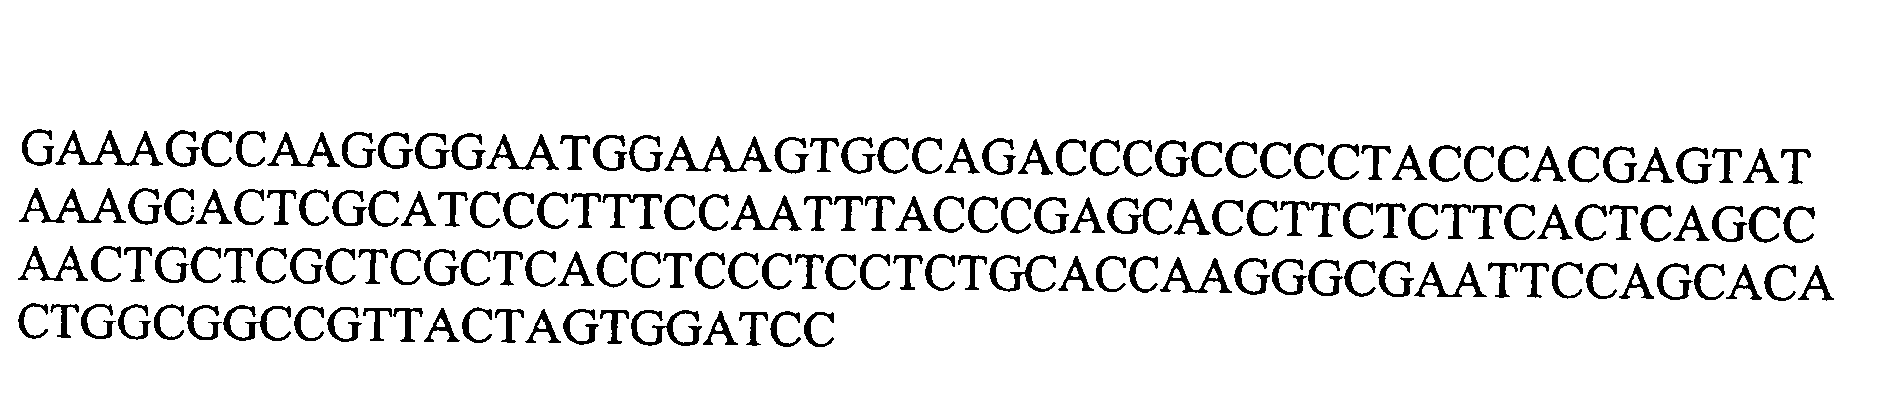 Vectors for stable gene expression